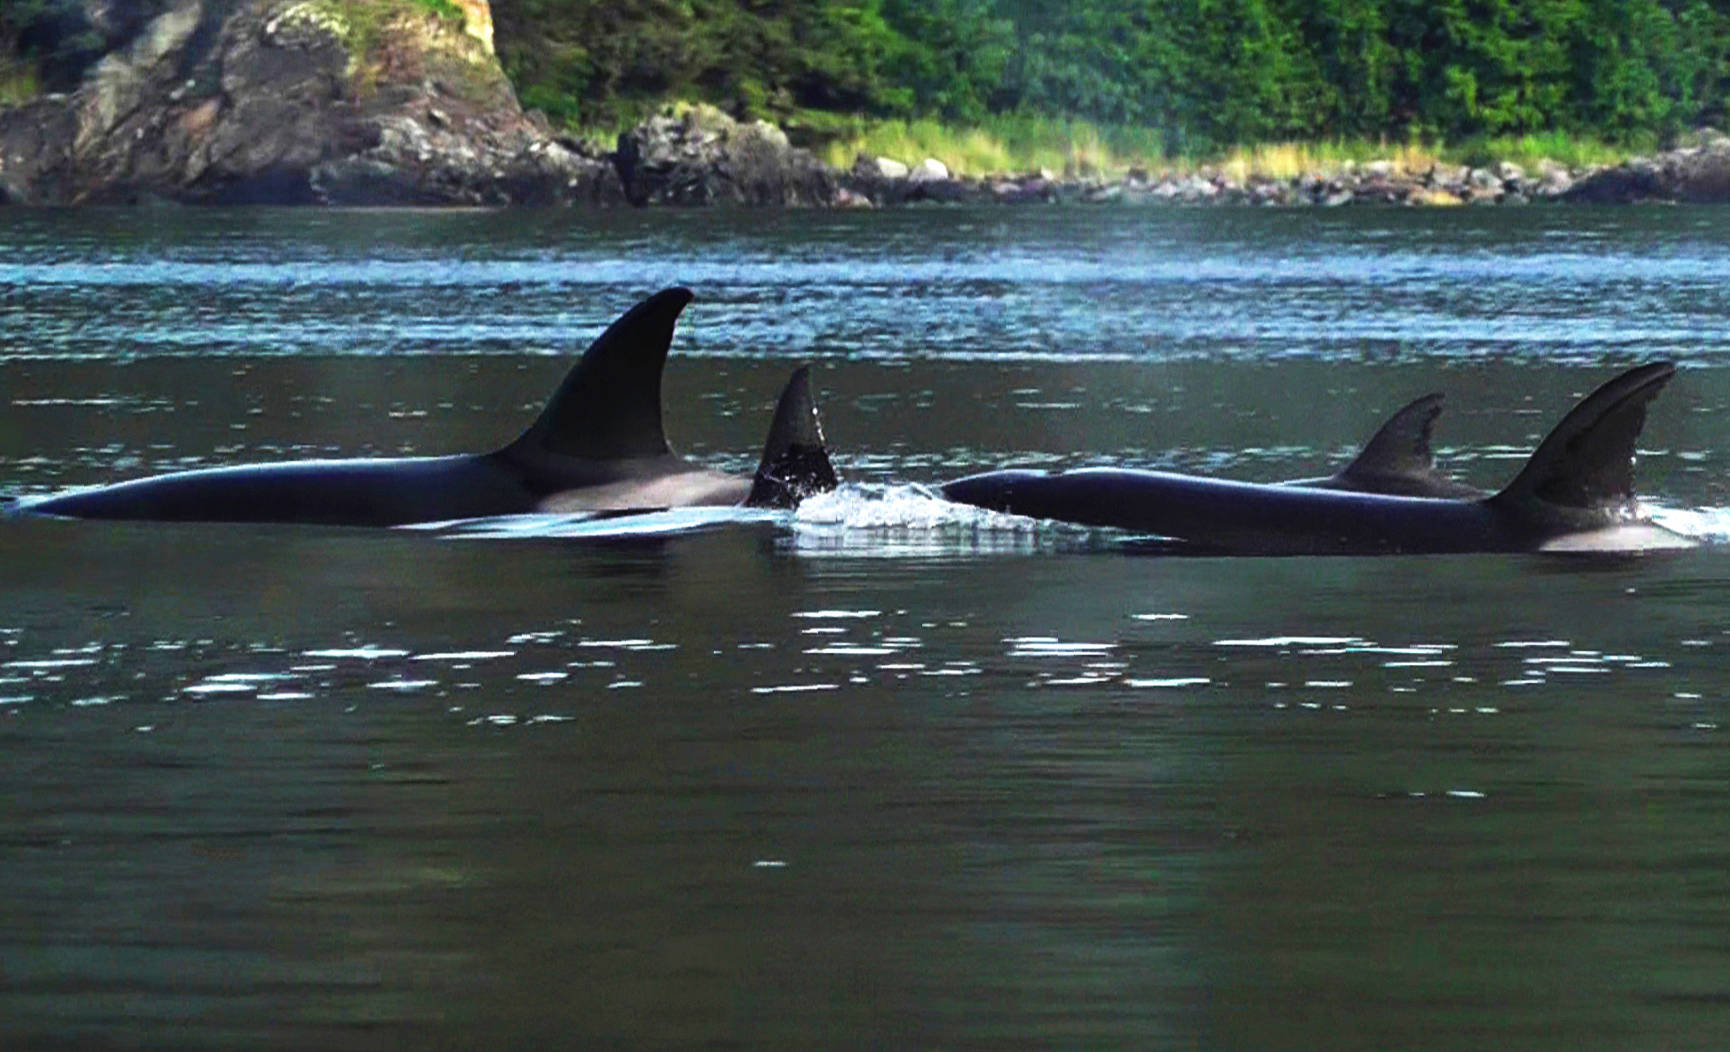 “While trolling for silvers, I had a pod of killer whales check us out,” writes Tom Matthews of this photo shared Sept. 3, 2020. (Courtesy Photo / Tom Matthews)